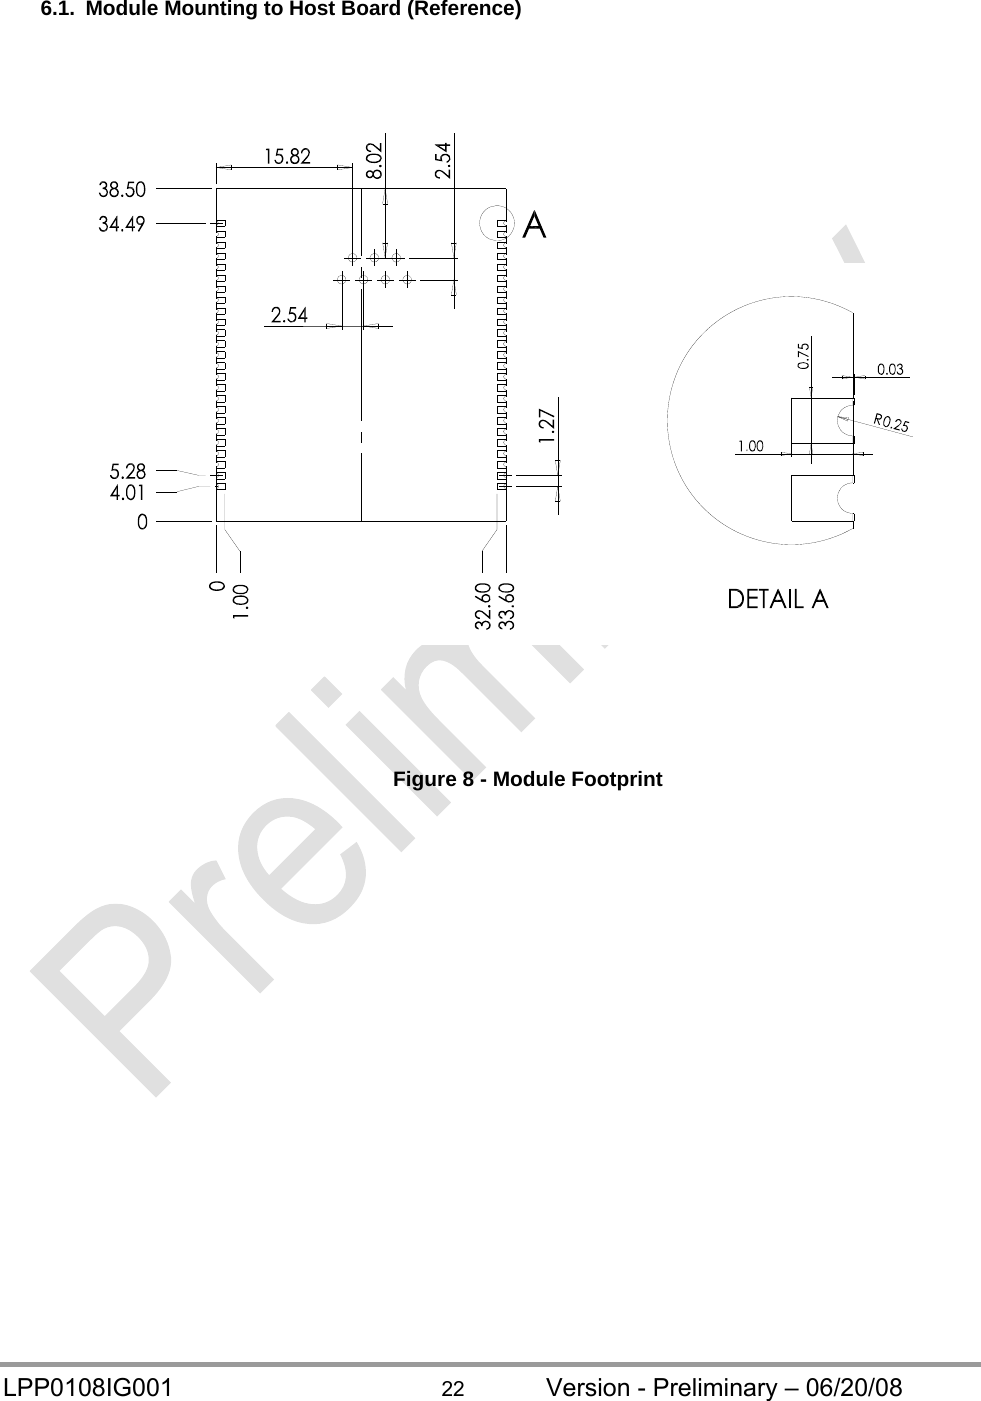  LPP0108IG001  22  Version - Preliminary – 06/20/08 6.1.  Module Mounting to Host Board (Reference)      Figure 8 - Module Footprint 